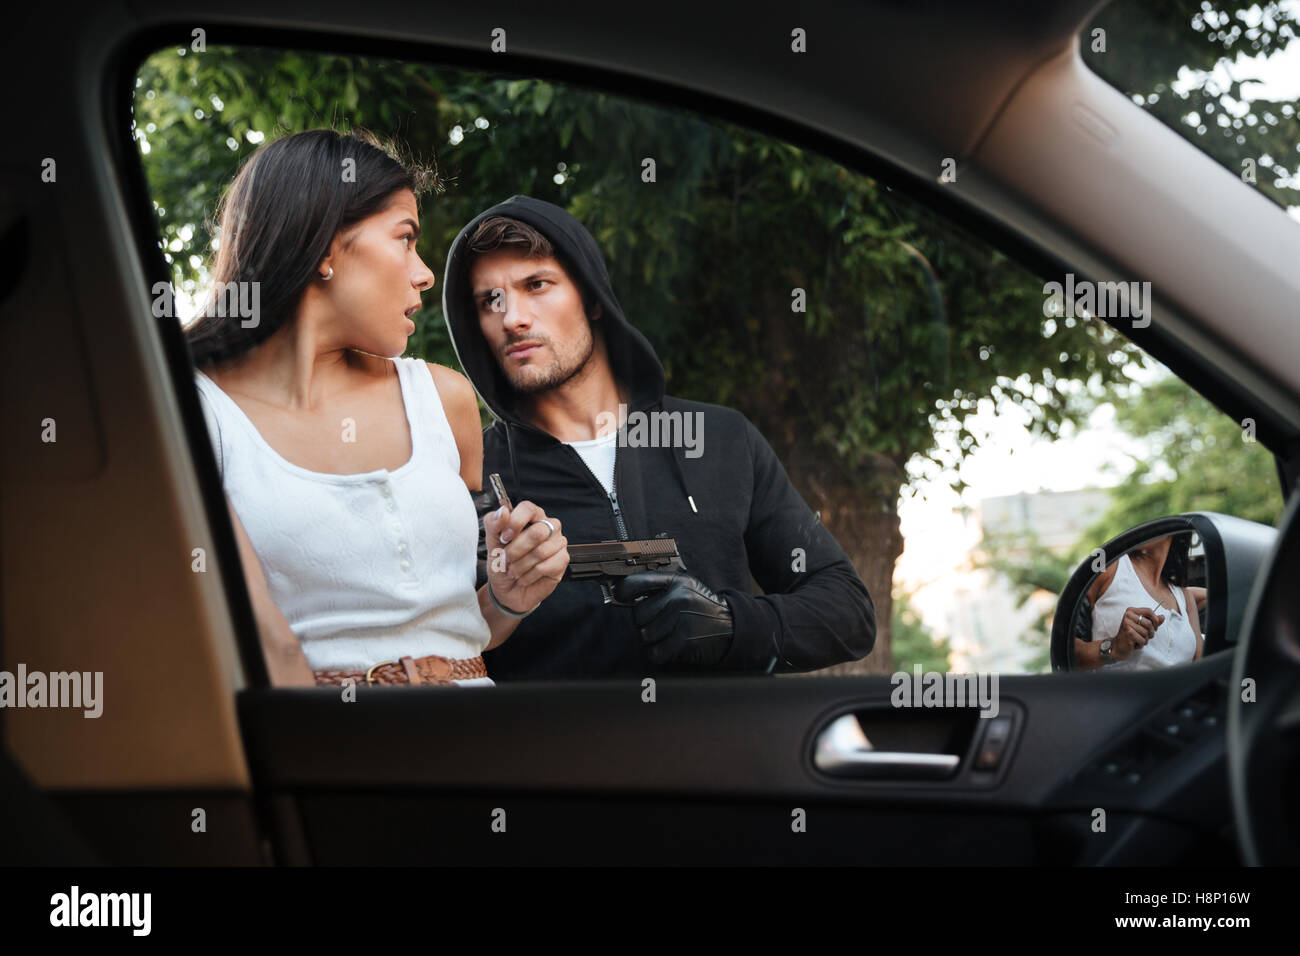 Dangerous criminal man with gun stealing car of scared young woman on outdoor parking Stock Photo